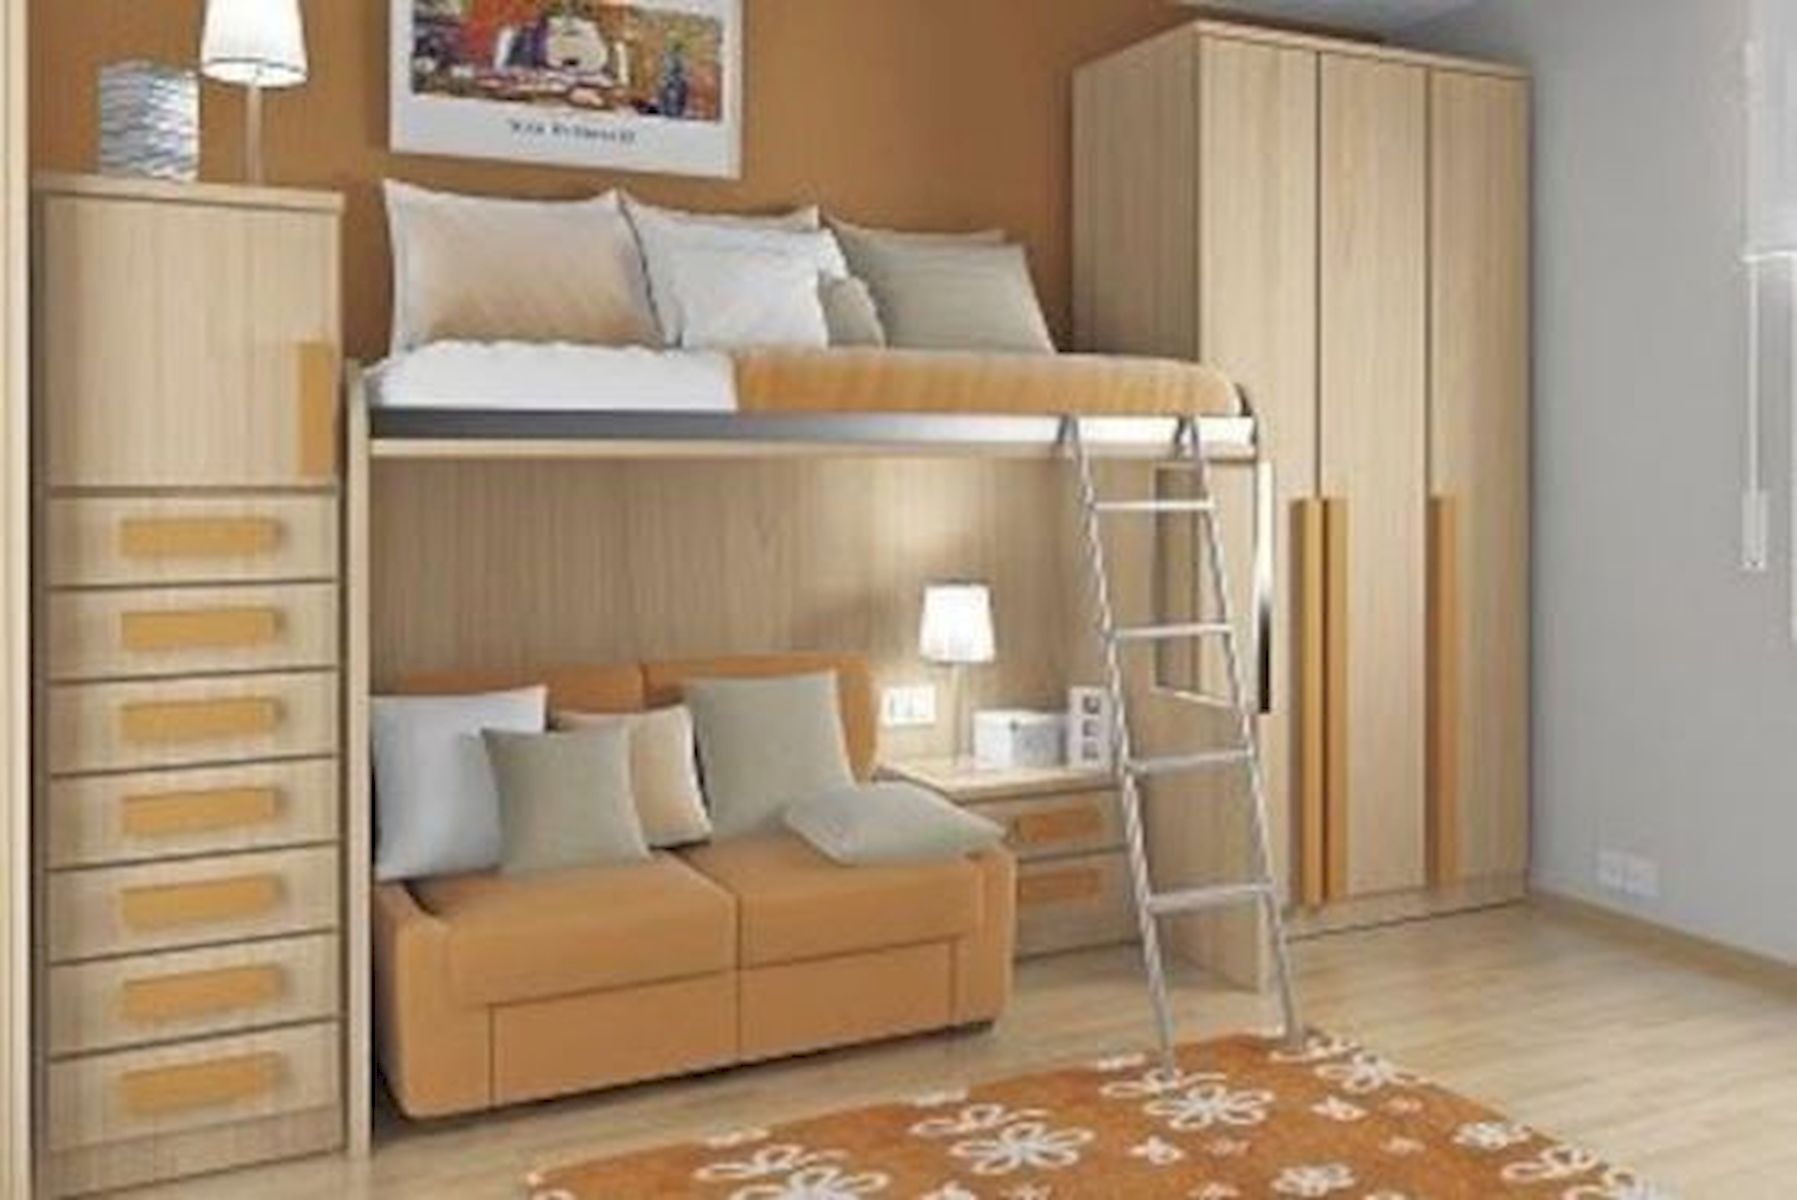 60 Brilliant Space Saving Ideas For Small Bedroom (42)